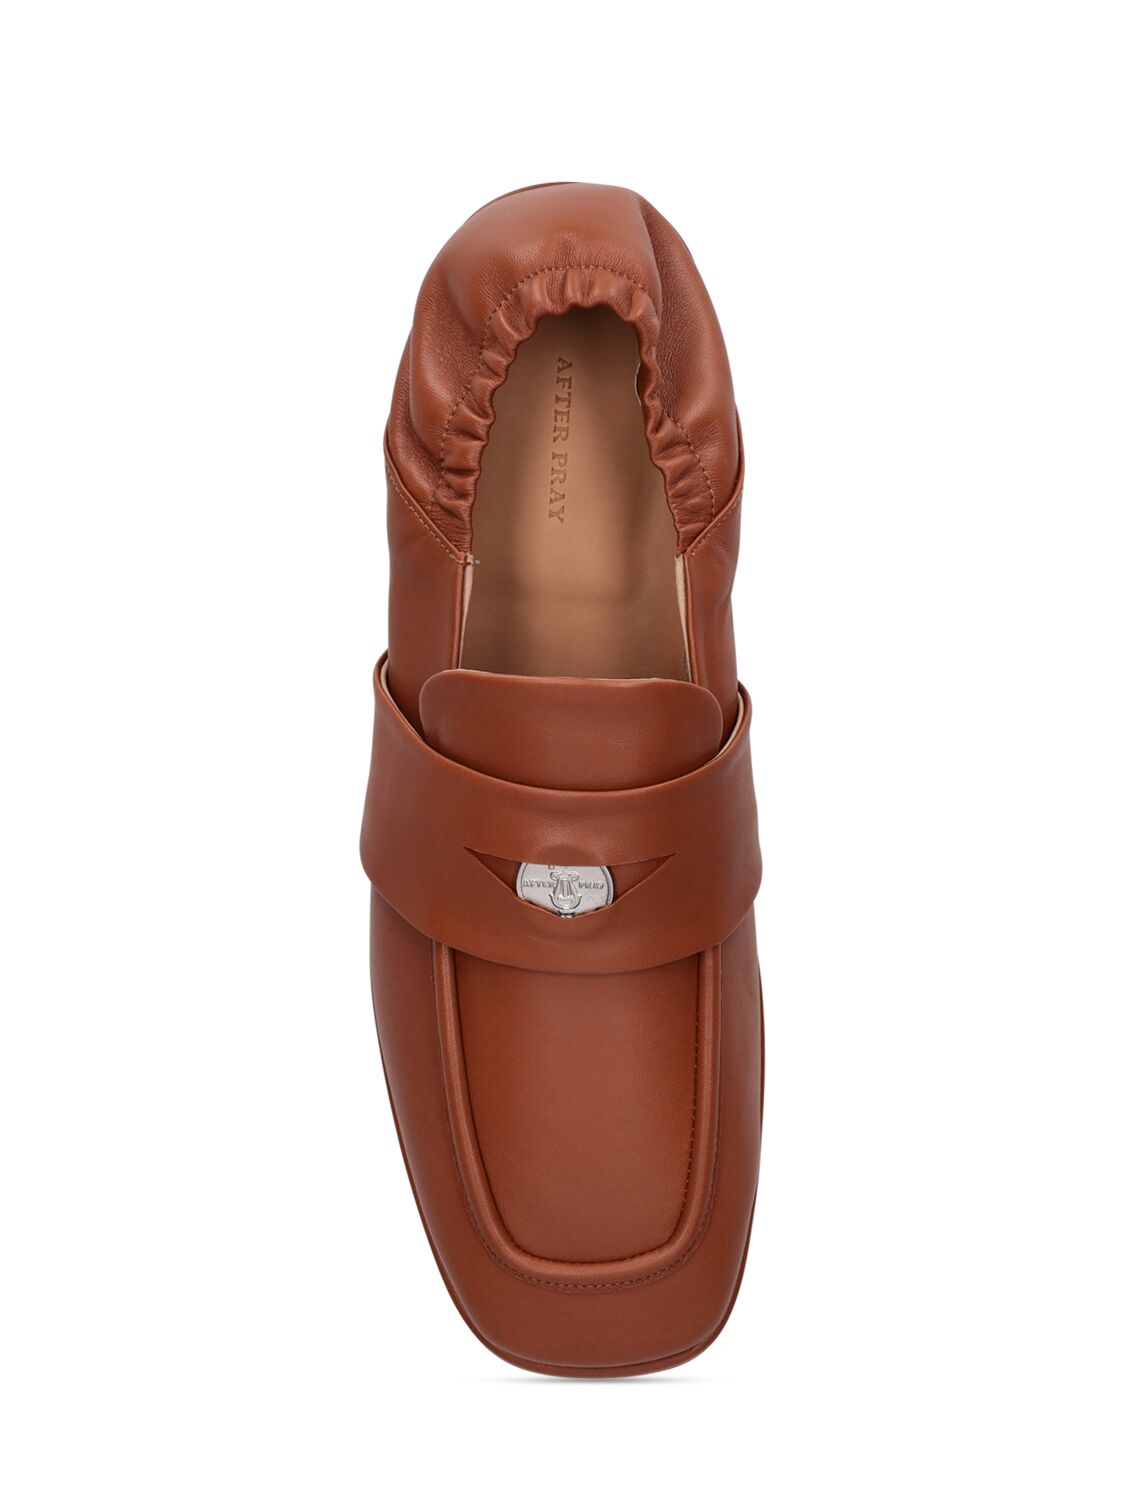 Shop After Pray Square Penny Loafers W/ Band In Tan Brown